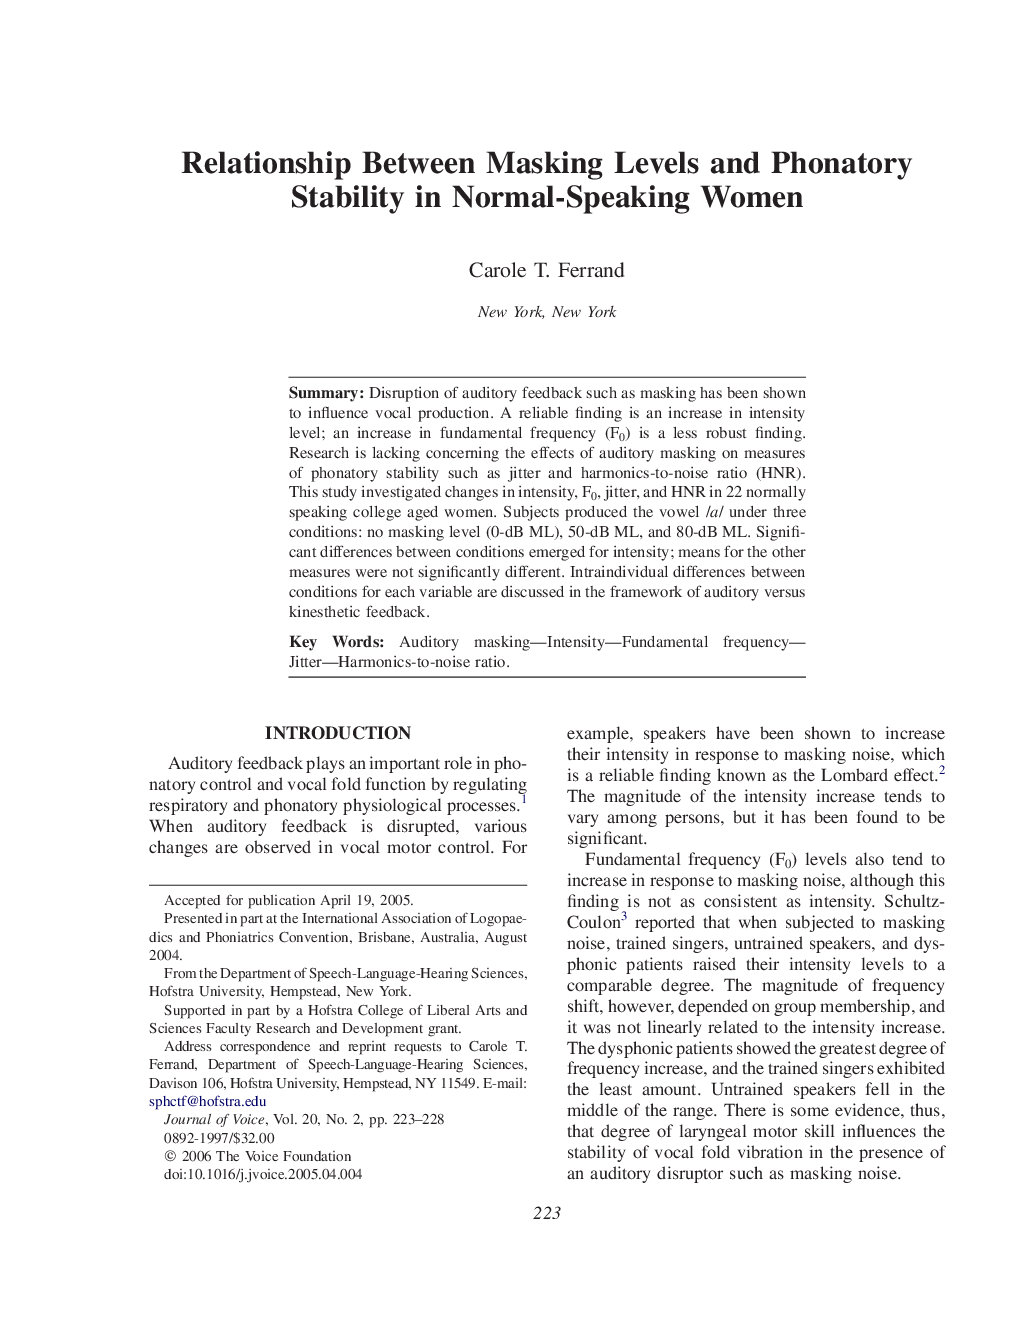 Relationship Between Masking Levels and Phonatory Stability in Normal-Speaking Women 